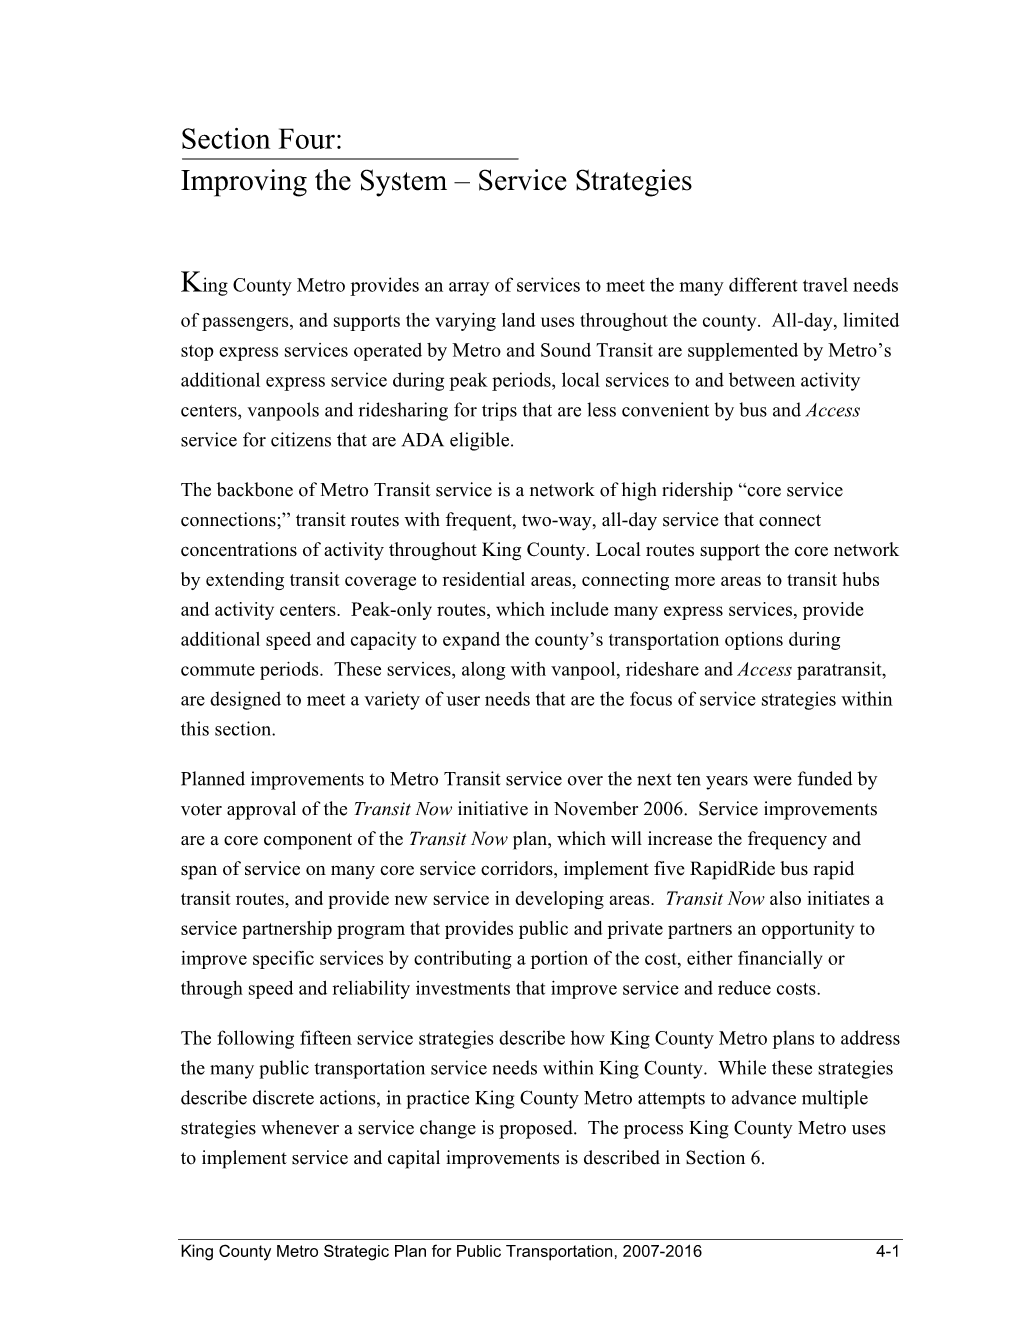 Section Four: Improving the System – Service Strategies King County